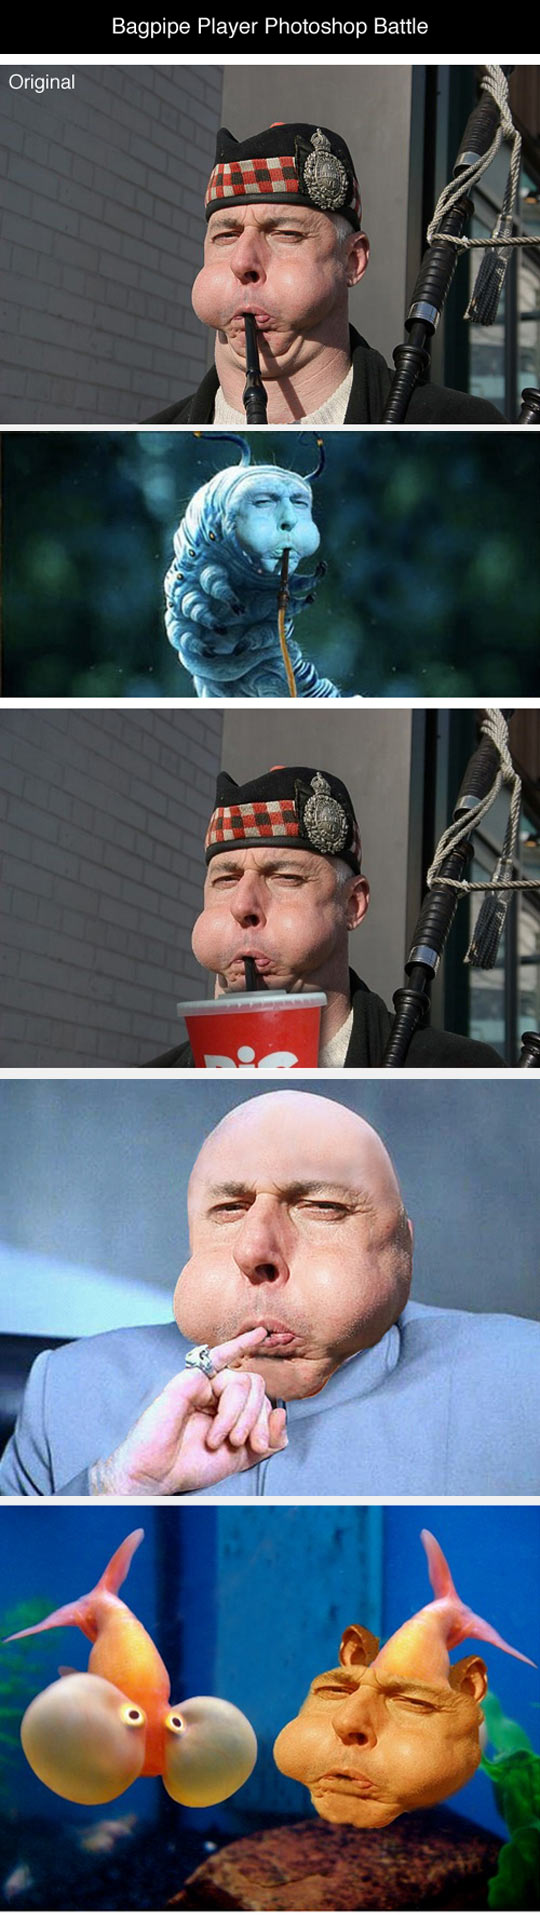 Bagpipe Player Photoshop Battle